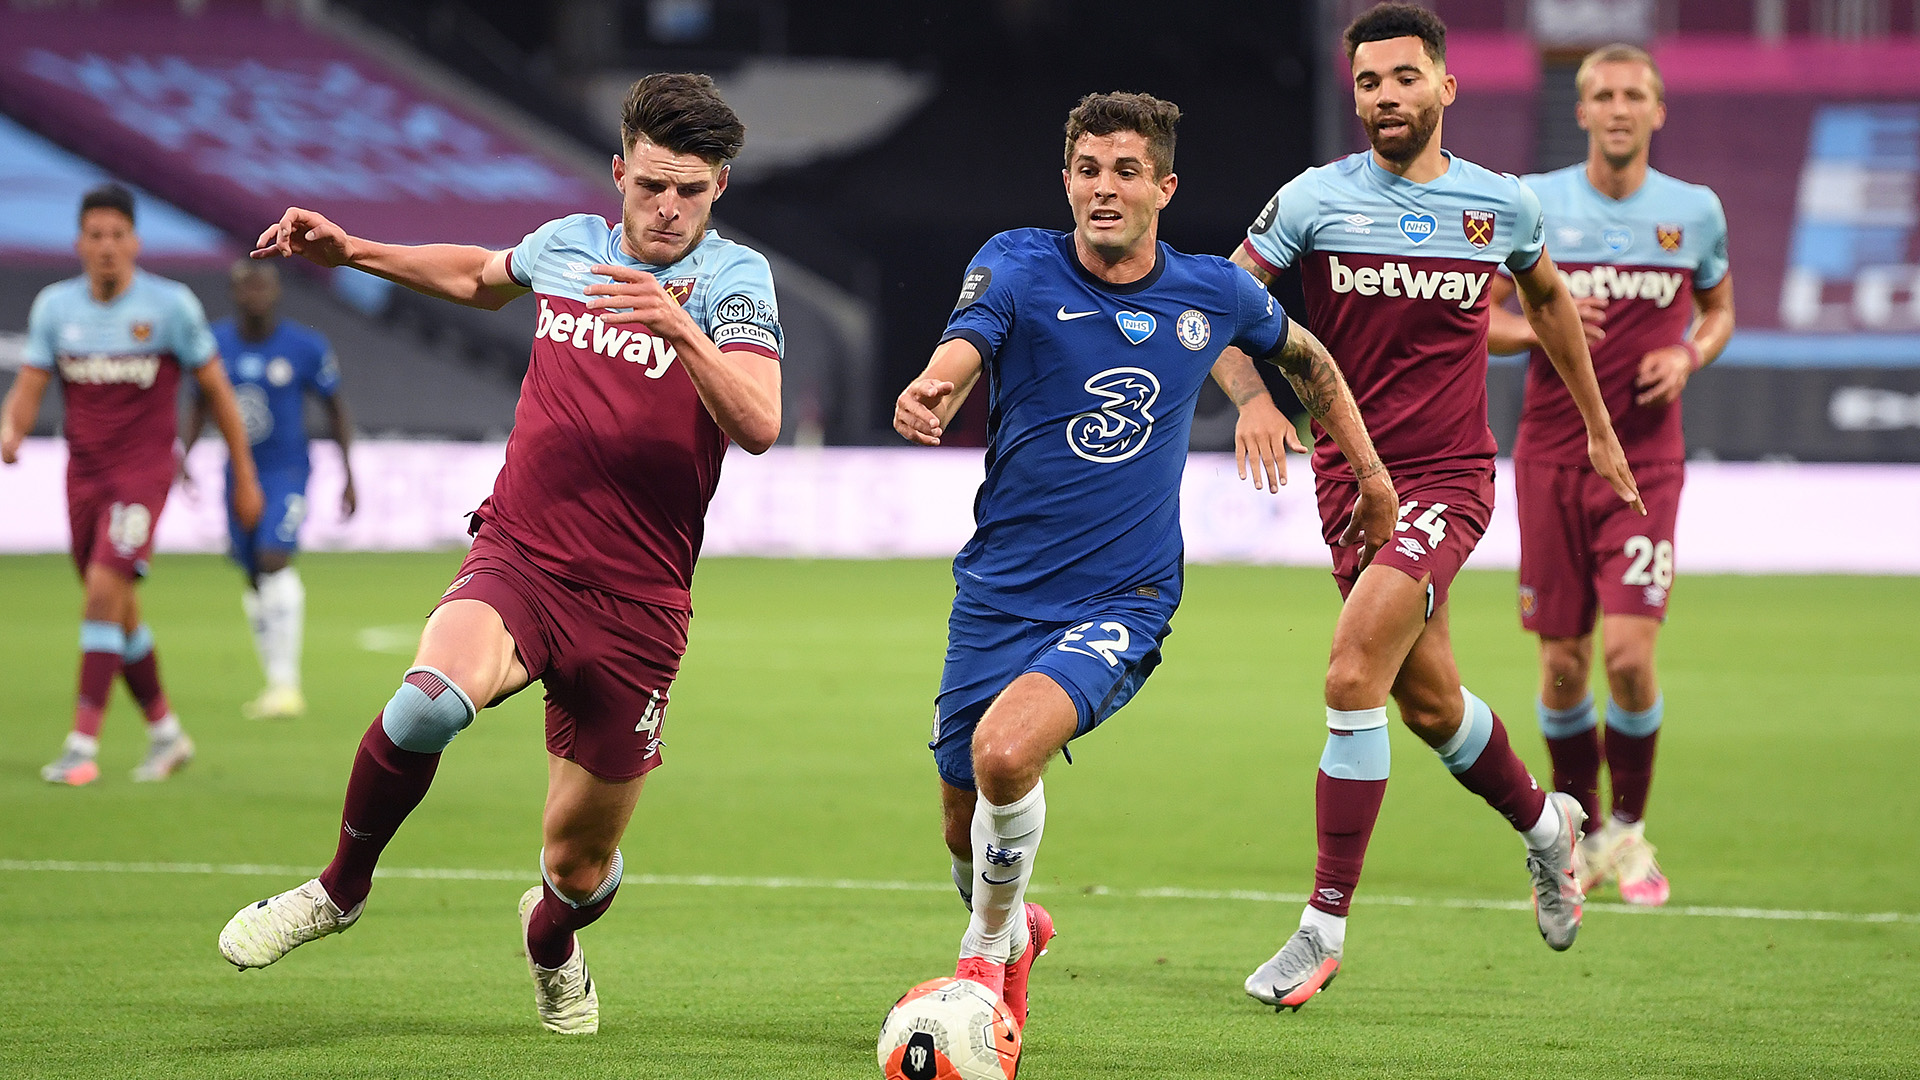 Hammers to Host Chelsea in Exciting all-London EPL Clash!